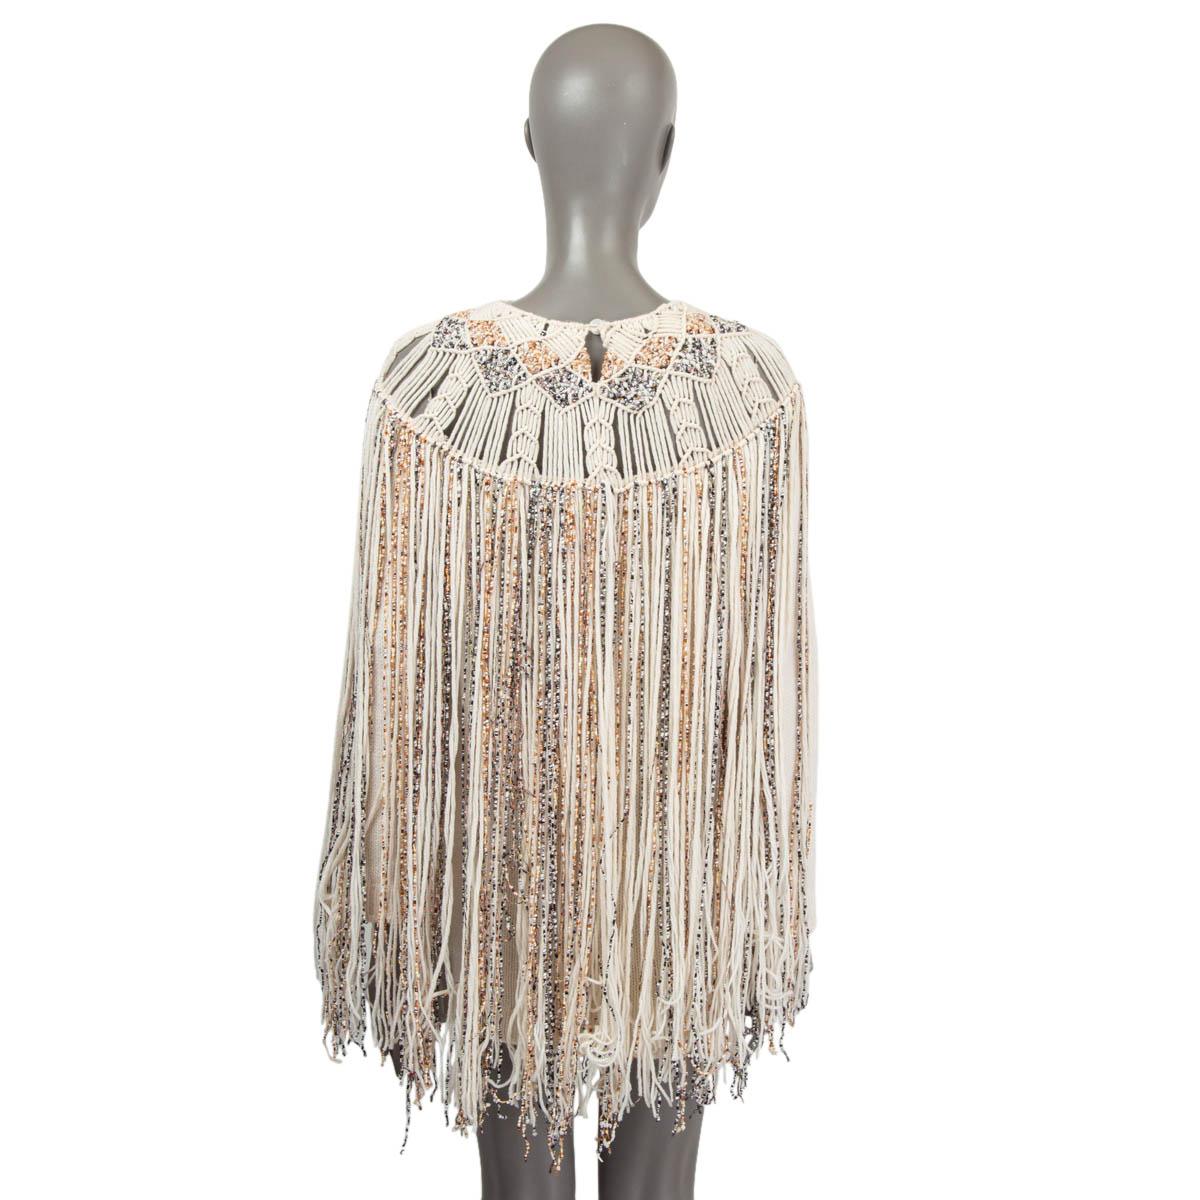 CHRISTIAN DIOR off-white cashmere 2018 FRINGED KNIT Dress 38 S 2